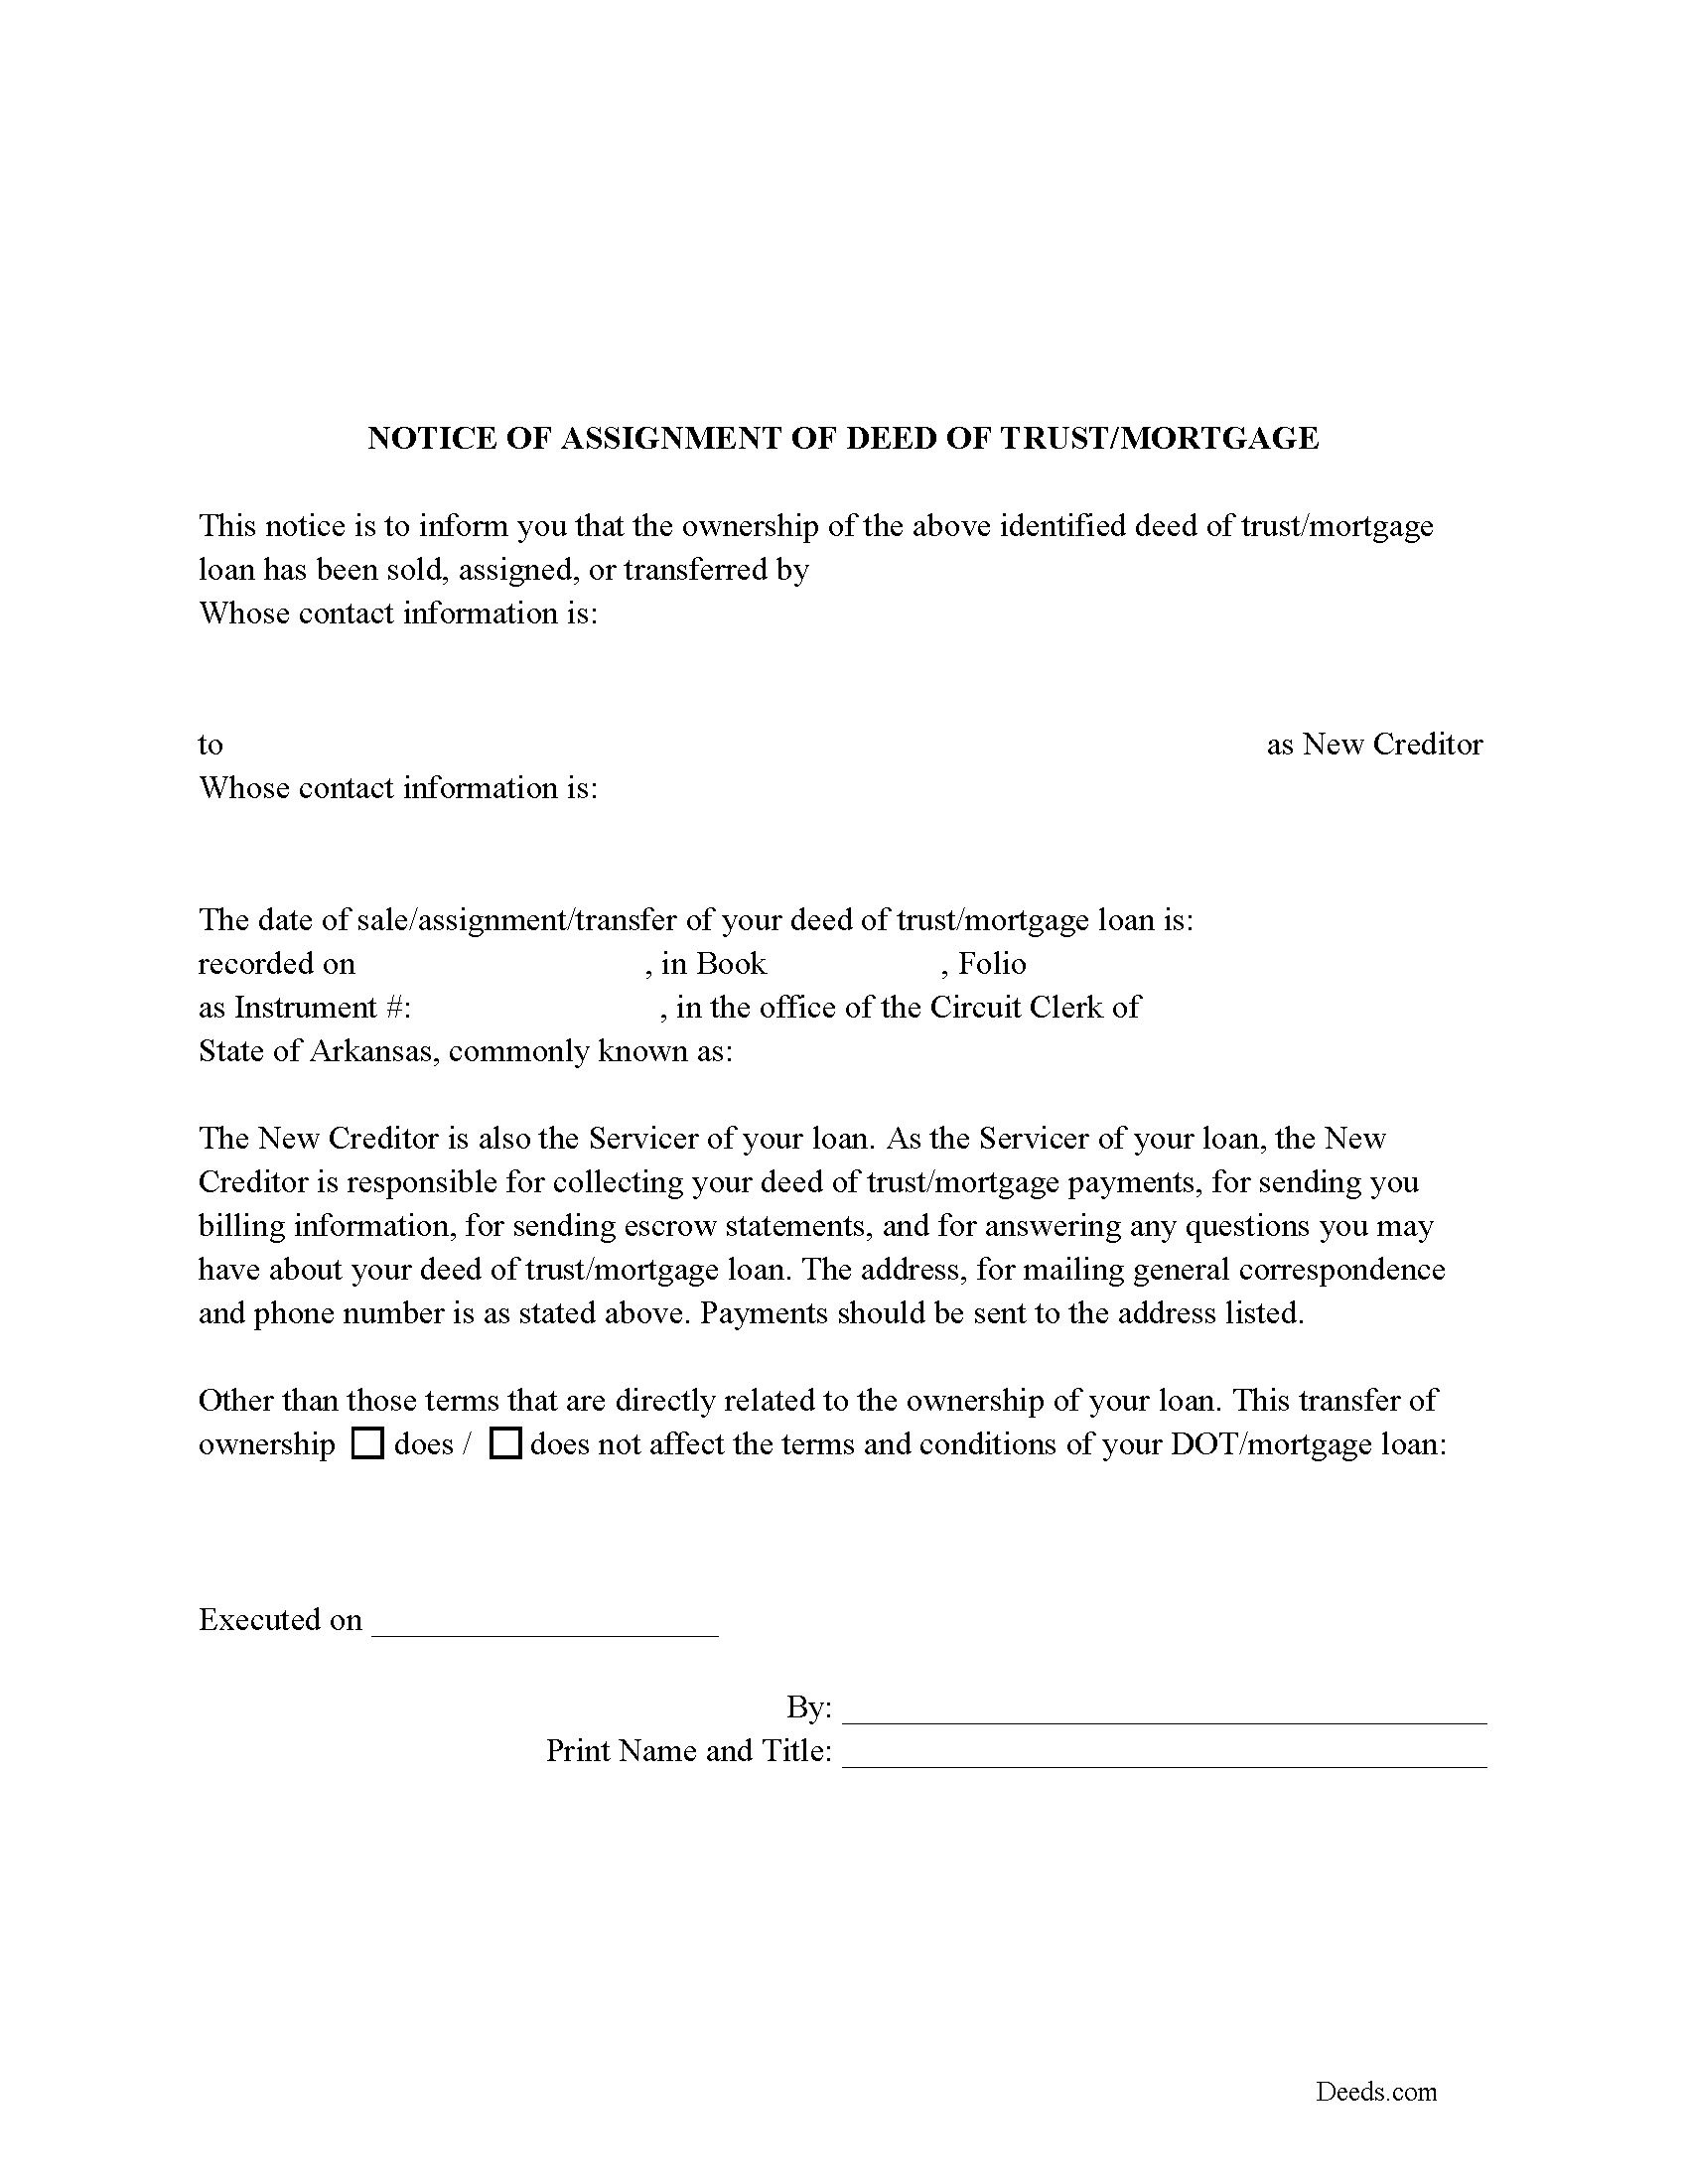 Notice of Assignment of Mortgage or DOT